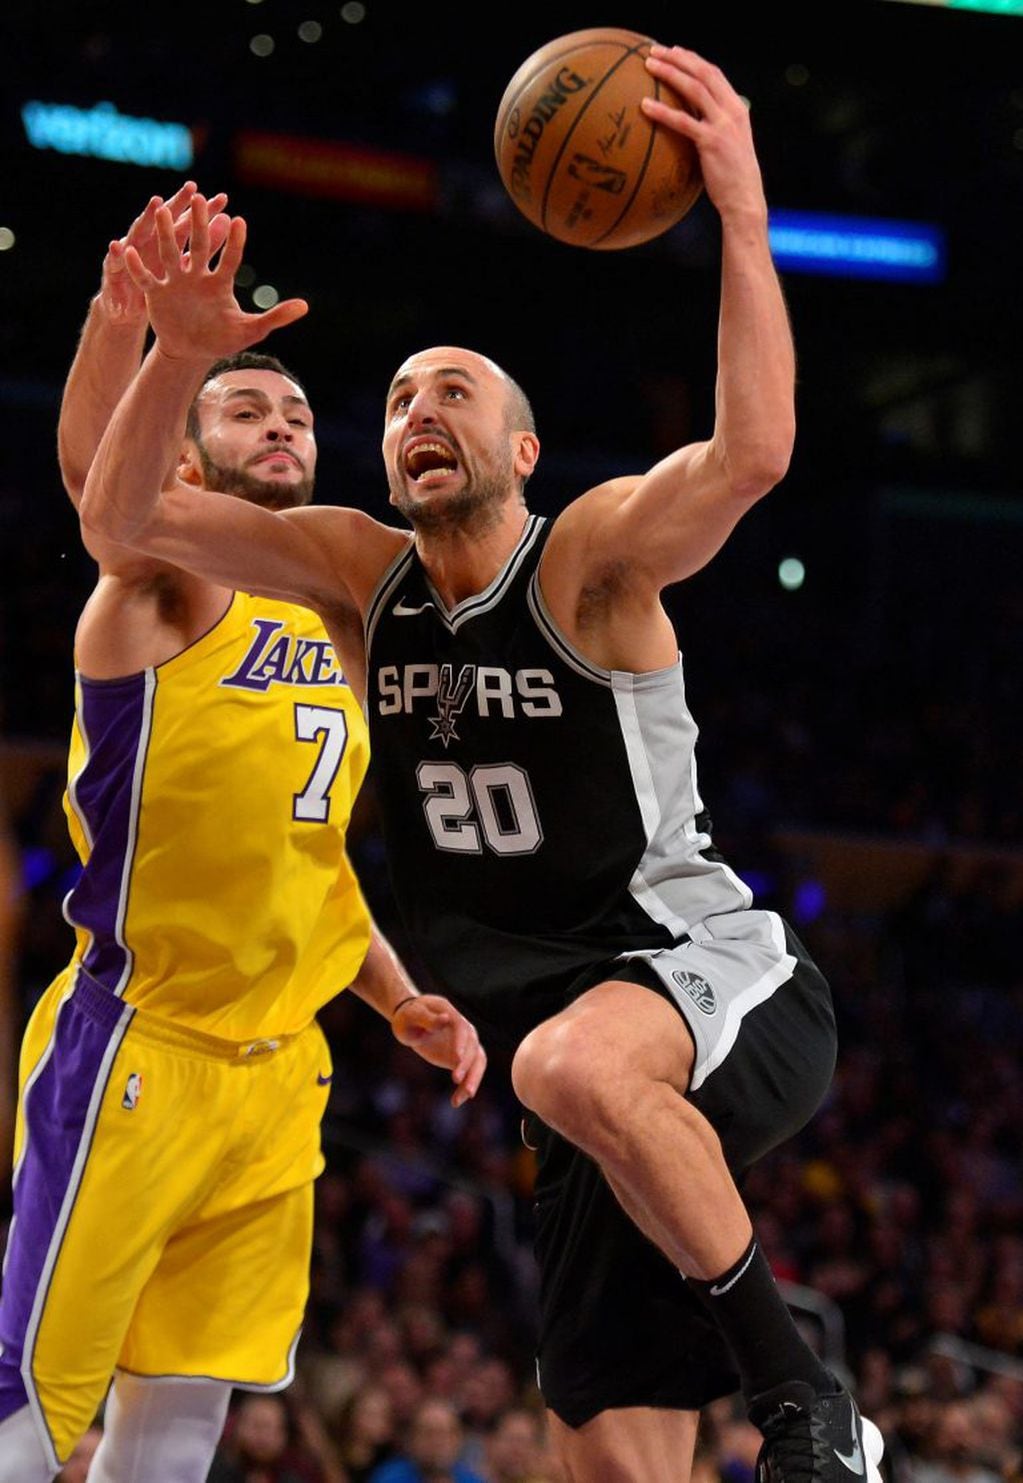 January 11, 2018; Los Angeles, CA, USA; San Antonio Spurs guard Manu Ginobili (20) moves to the basket against Los Angeles Lakers forward Larry Nance Jr. (7) during the second half at Staples Center. Mandatory Credit: Gary A. Vasquez-USA TODAY Sports